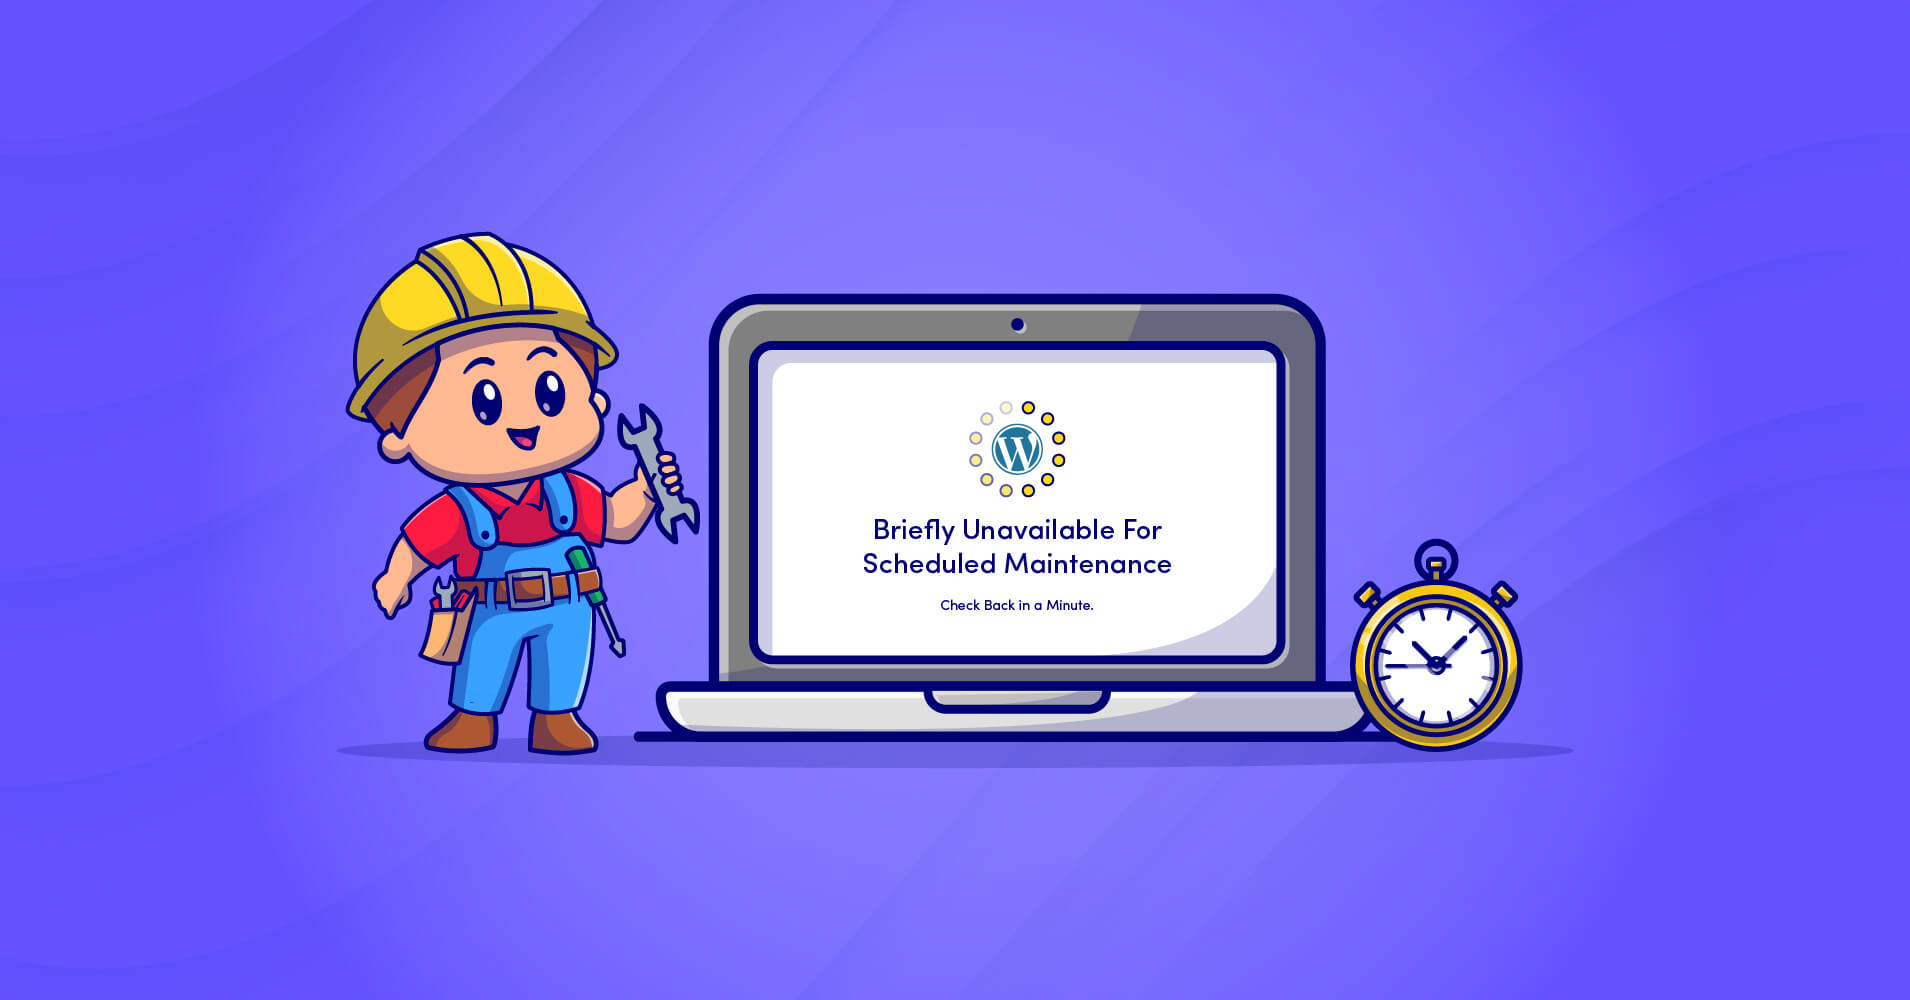 wordpress briefly unavailable for scheduled maintenance. check back in a minute